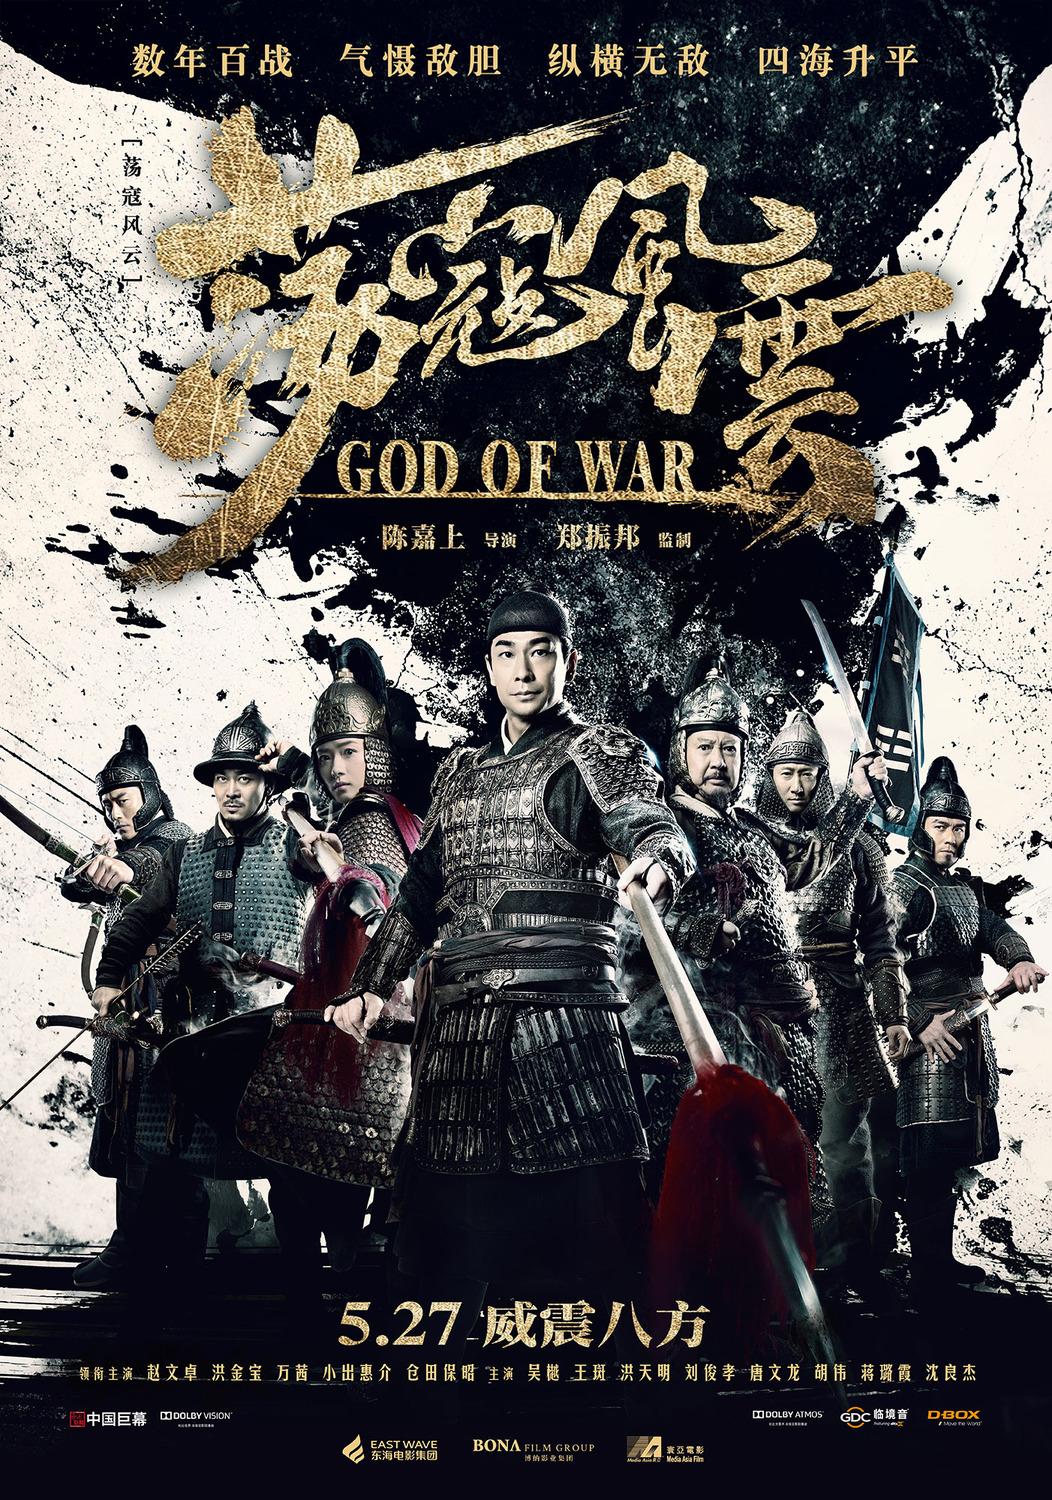 Extra Large Movie Poster Image for Dang kou feng yun 